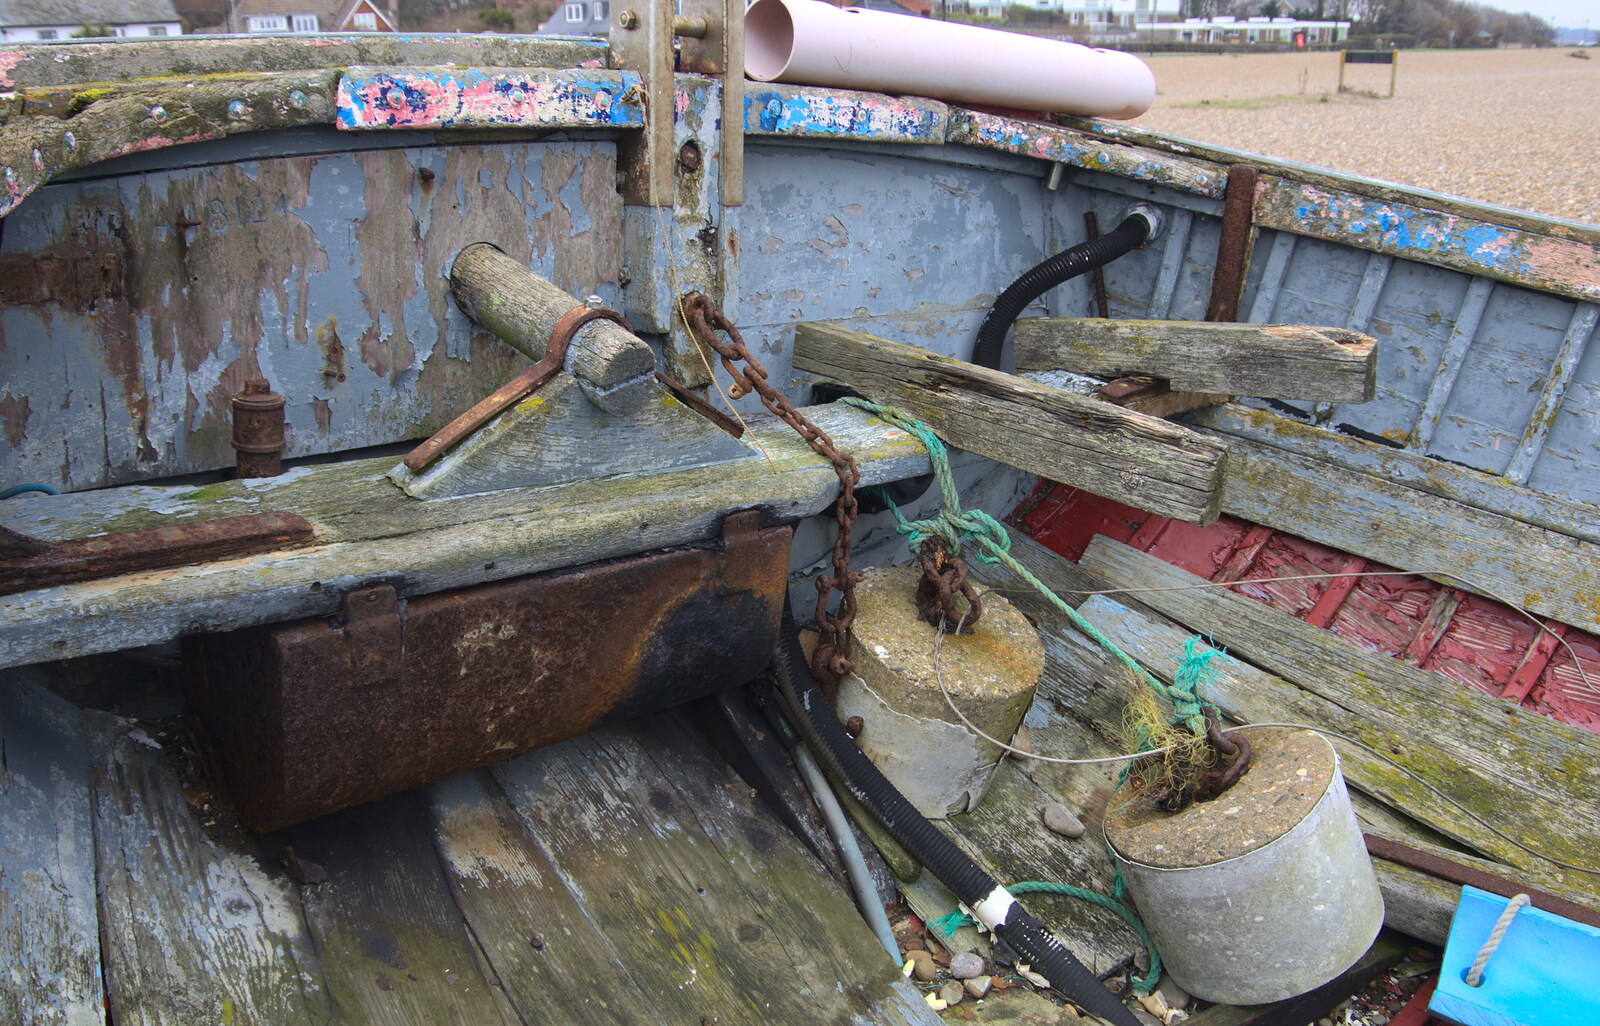 Wrecked fishing boat, and old concrete weights from A Postcard from Aldeburgh, Suffolk - 6th January 2019